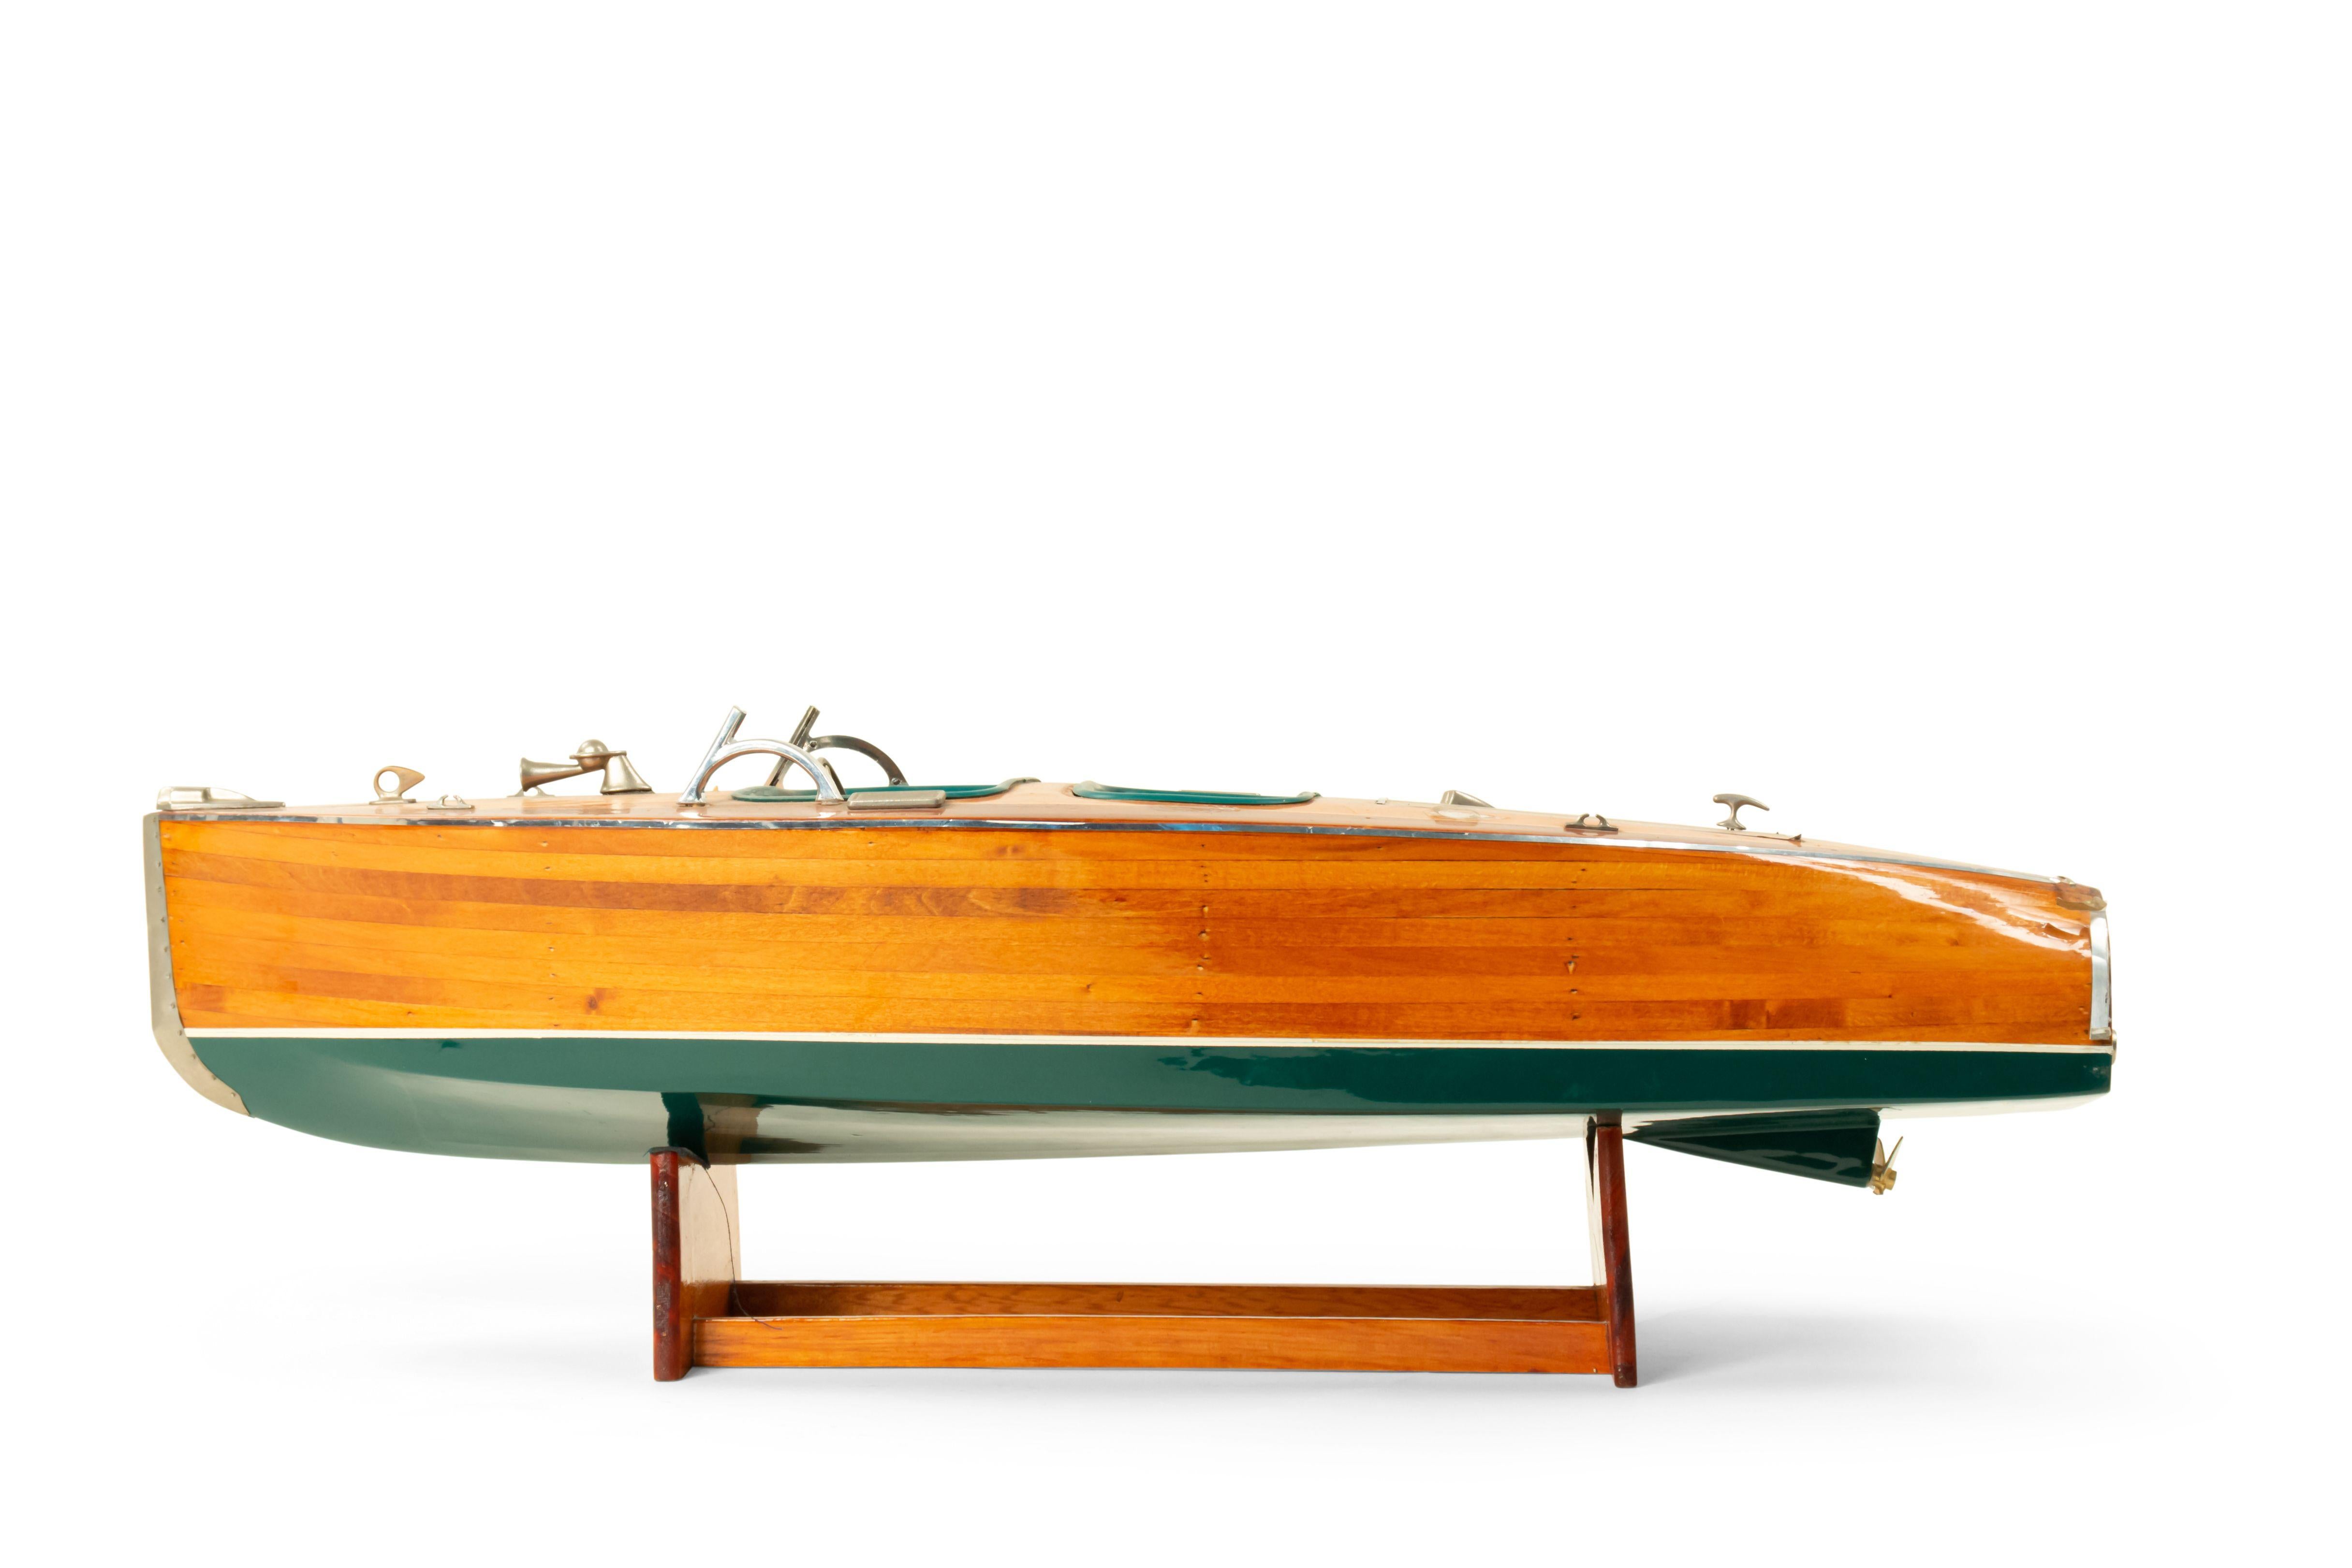 American Country Rustic style Mid-Century wood model of a motor boat with a green trim on a stand
